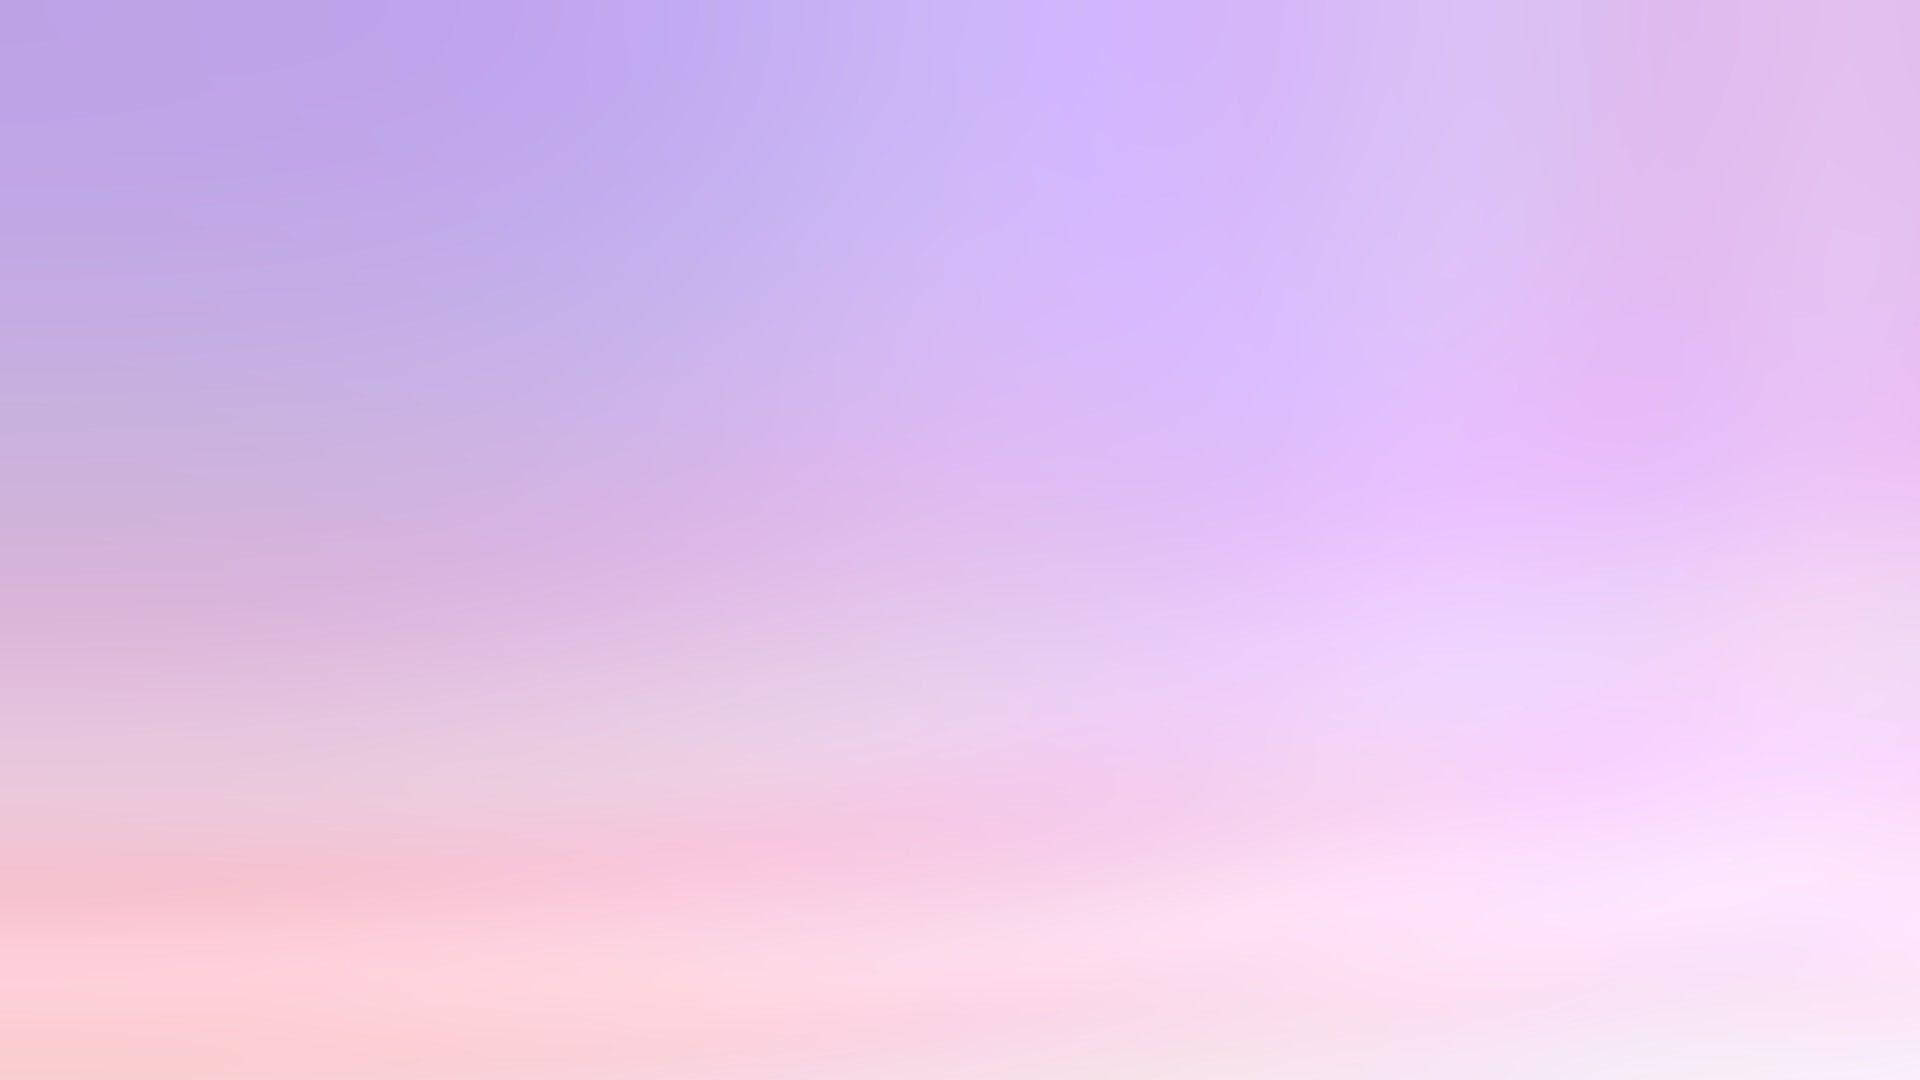 Gradient Pink And Blue Sky Picture